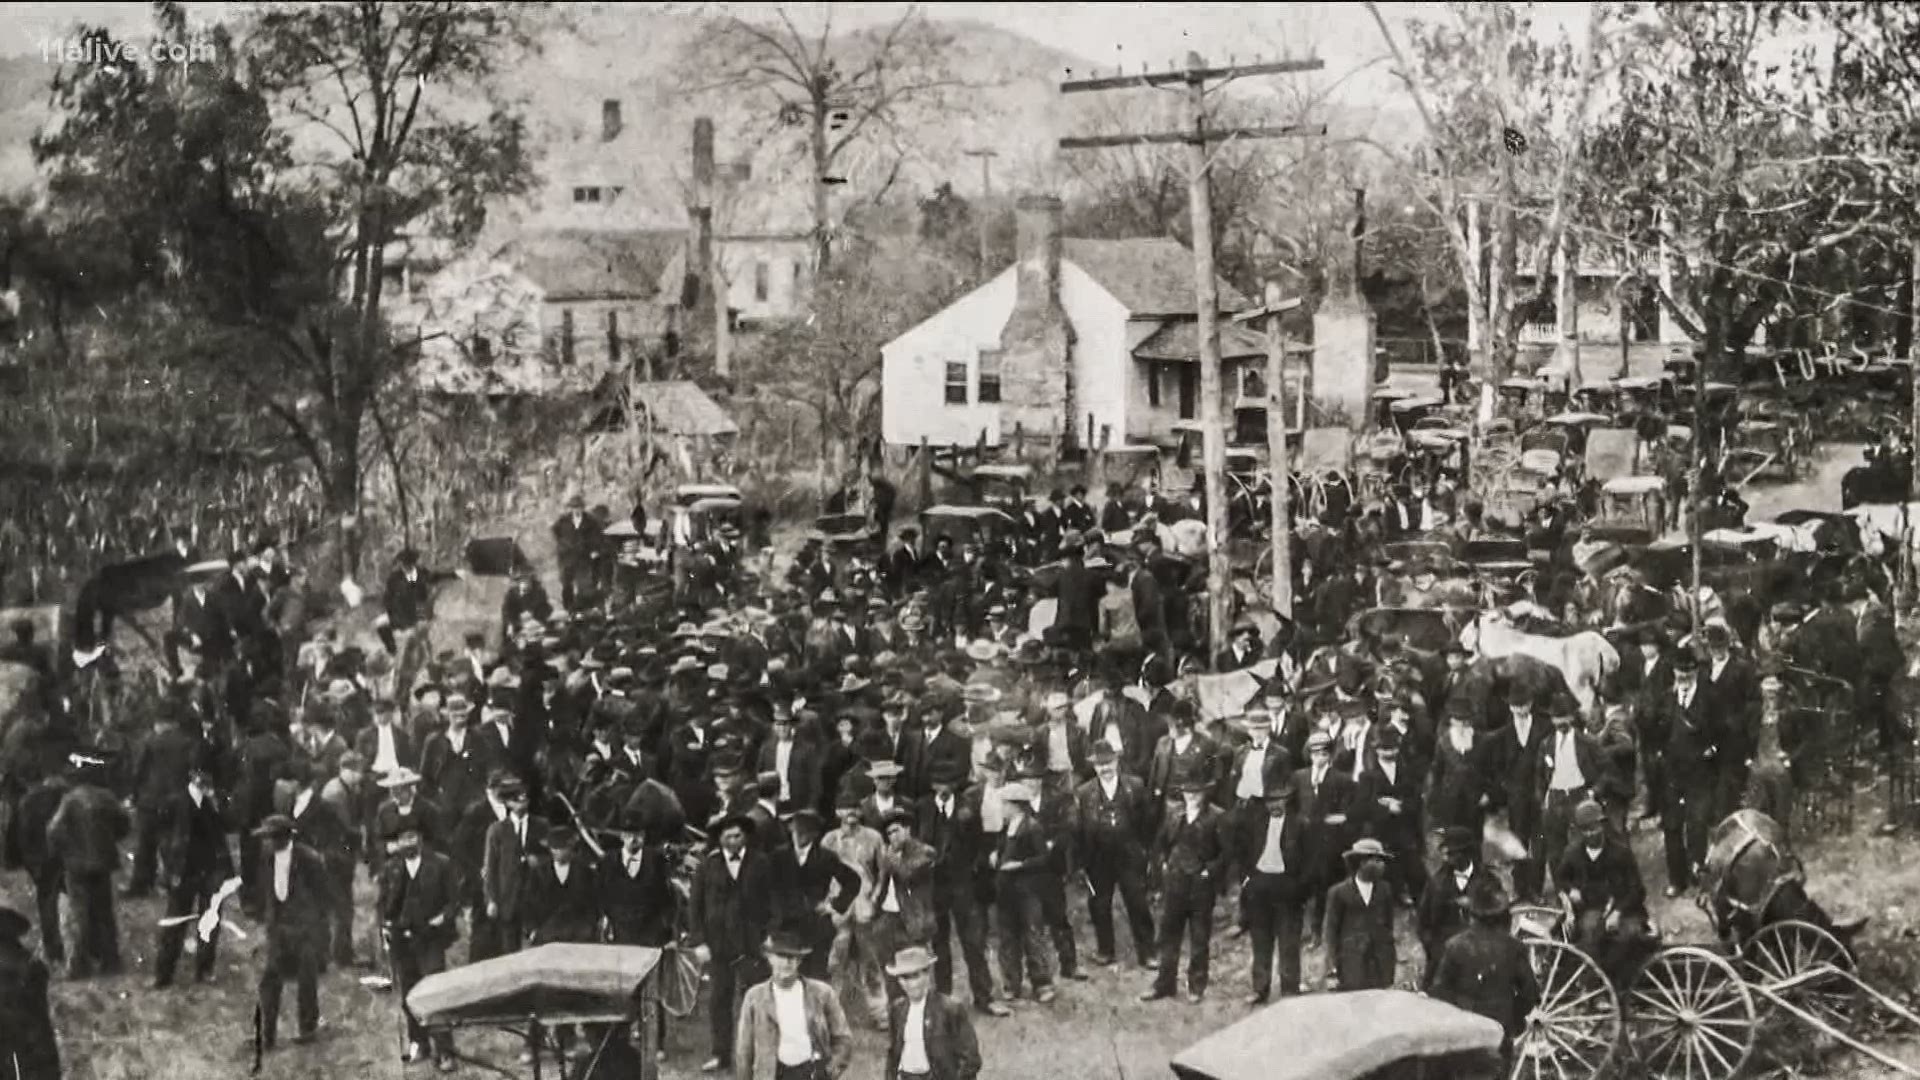 In 1912, Forsyth County forced its Black residents out and stayed nearly all-white for 75 years. Soon, a marker will memorialize the lynching that started it all.